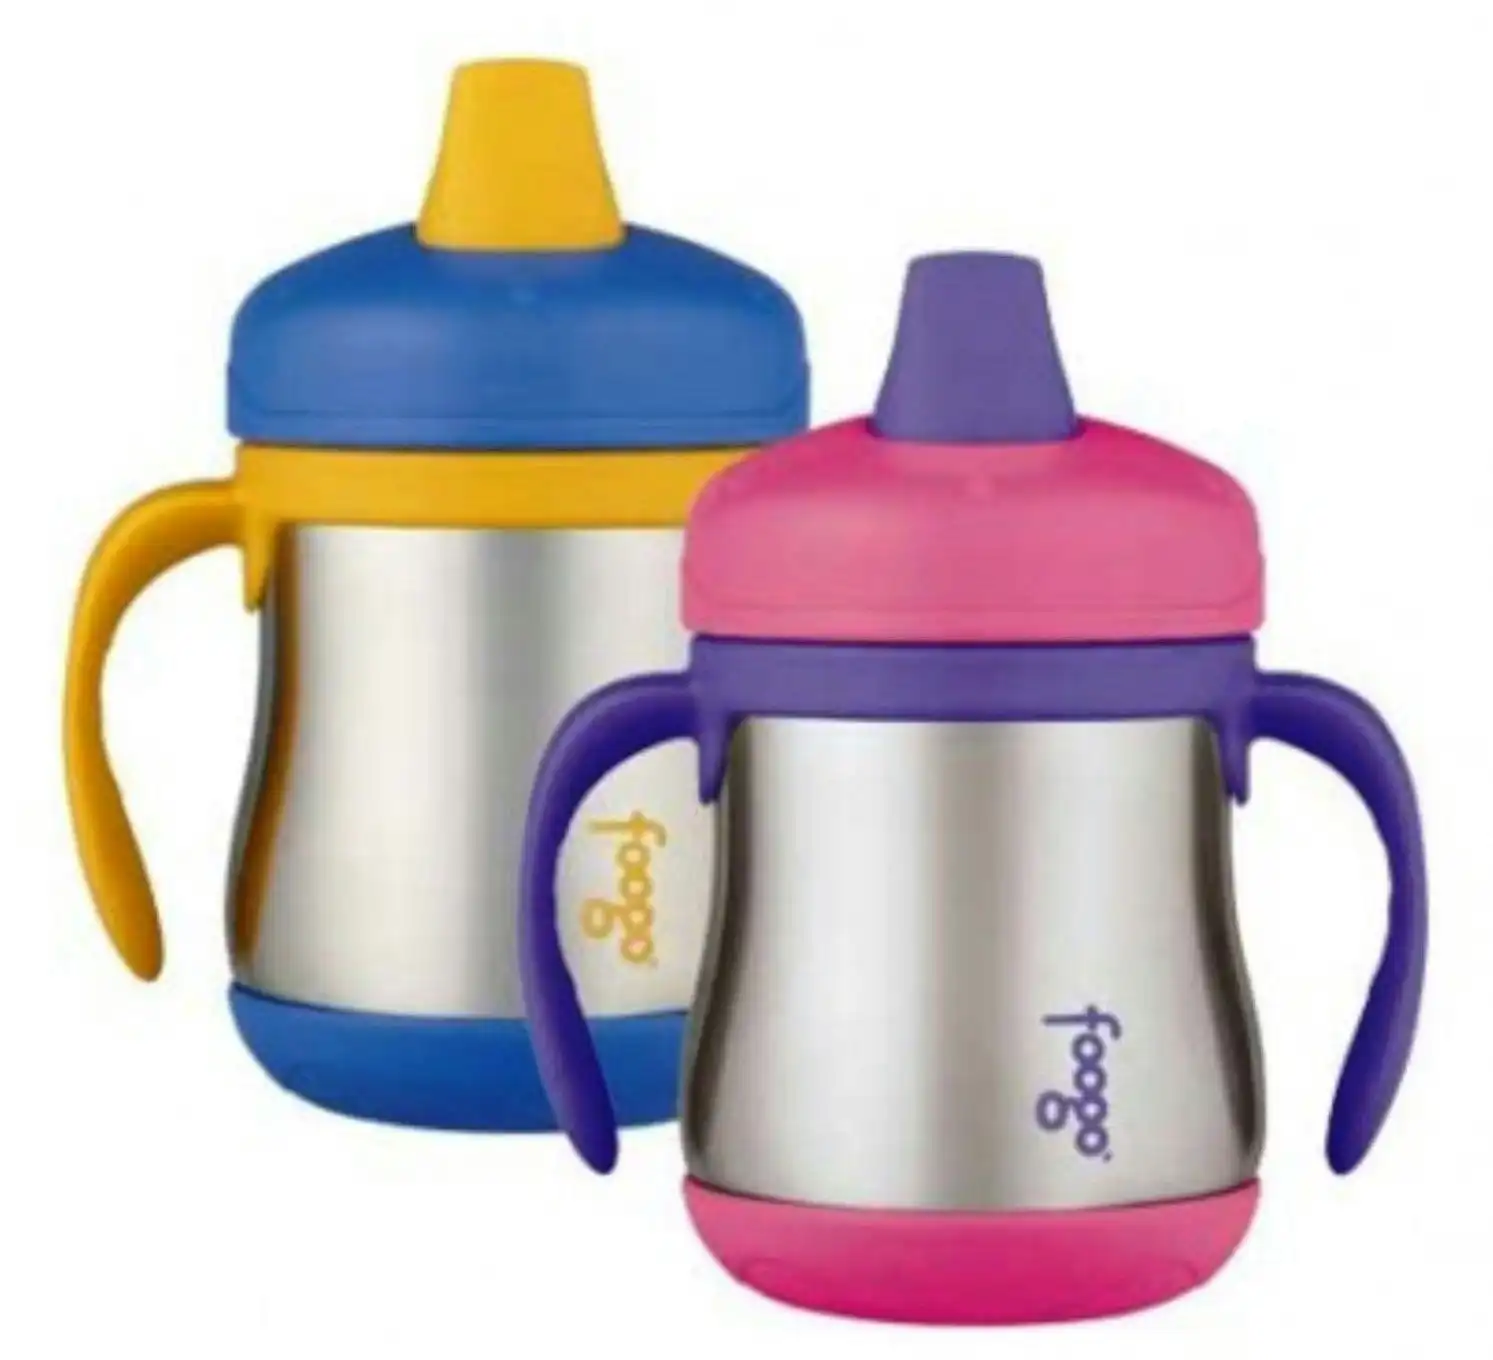 Thermos FOOGO 210ml STAINLESS STEEL SIPPY CUP WITH HANDLES - PINK OR BLUE